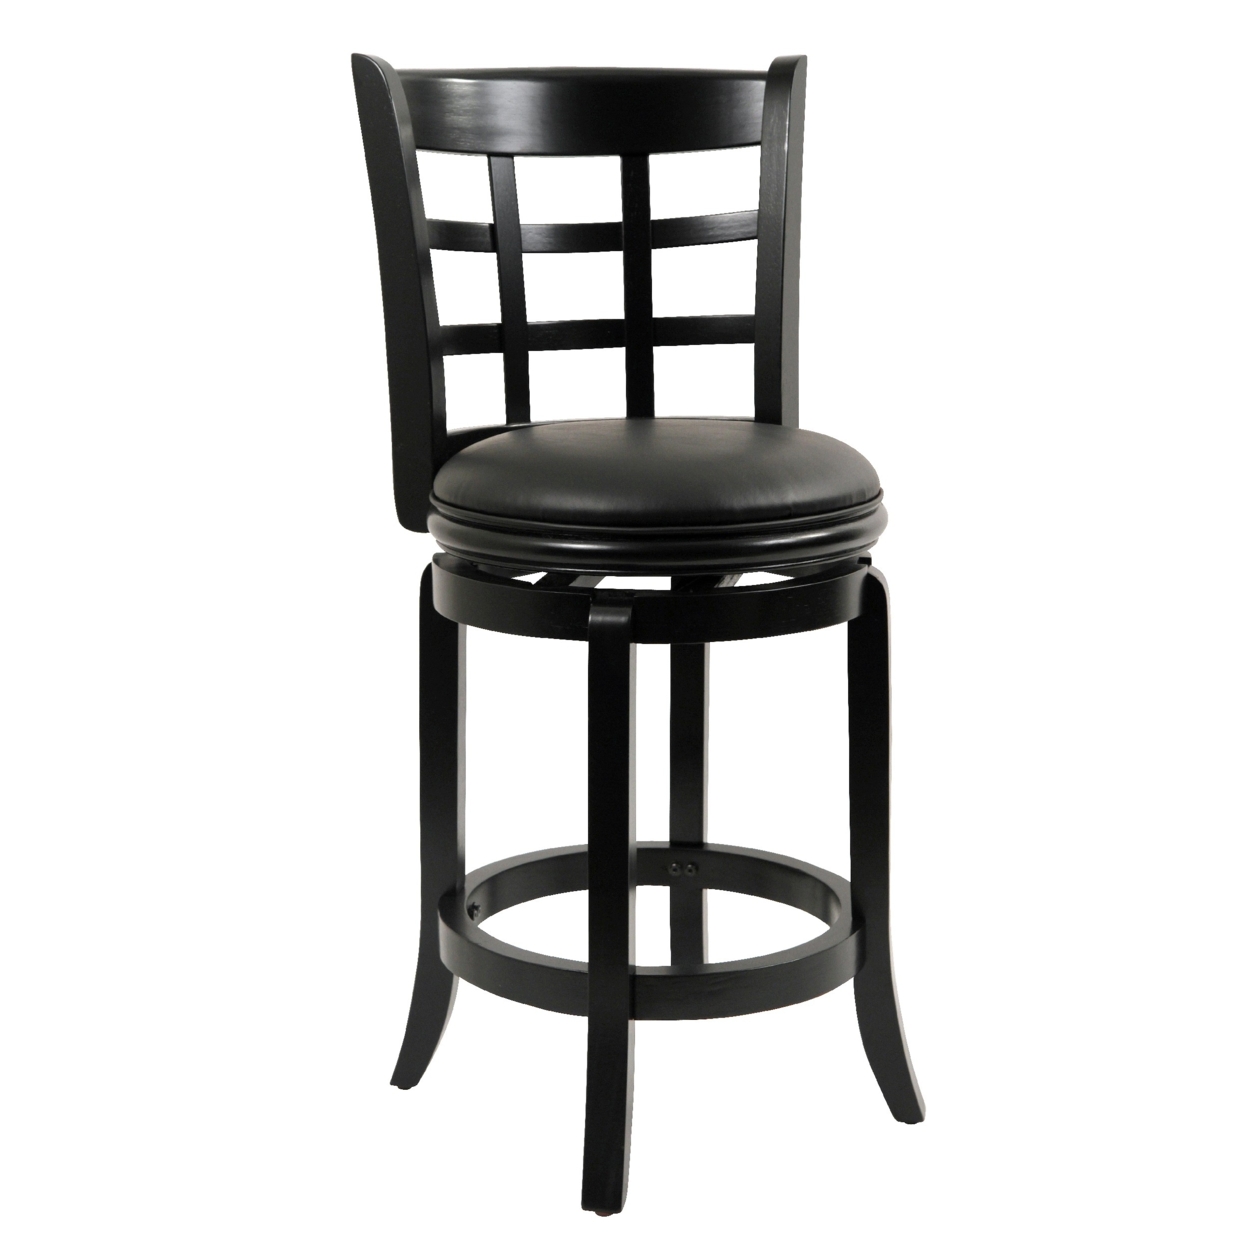 Sabi 24 Inch Swivel Counter Stool, Solid Wood, Faux Leather, Black